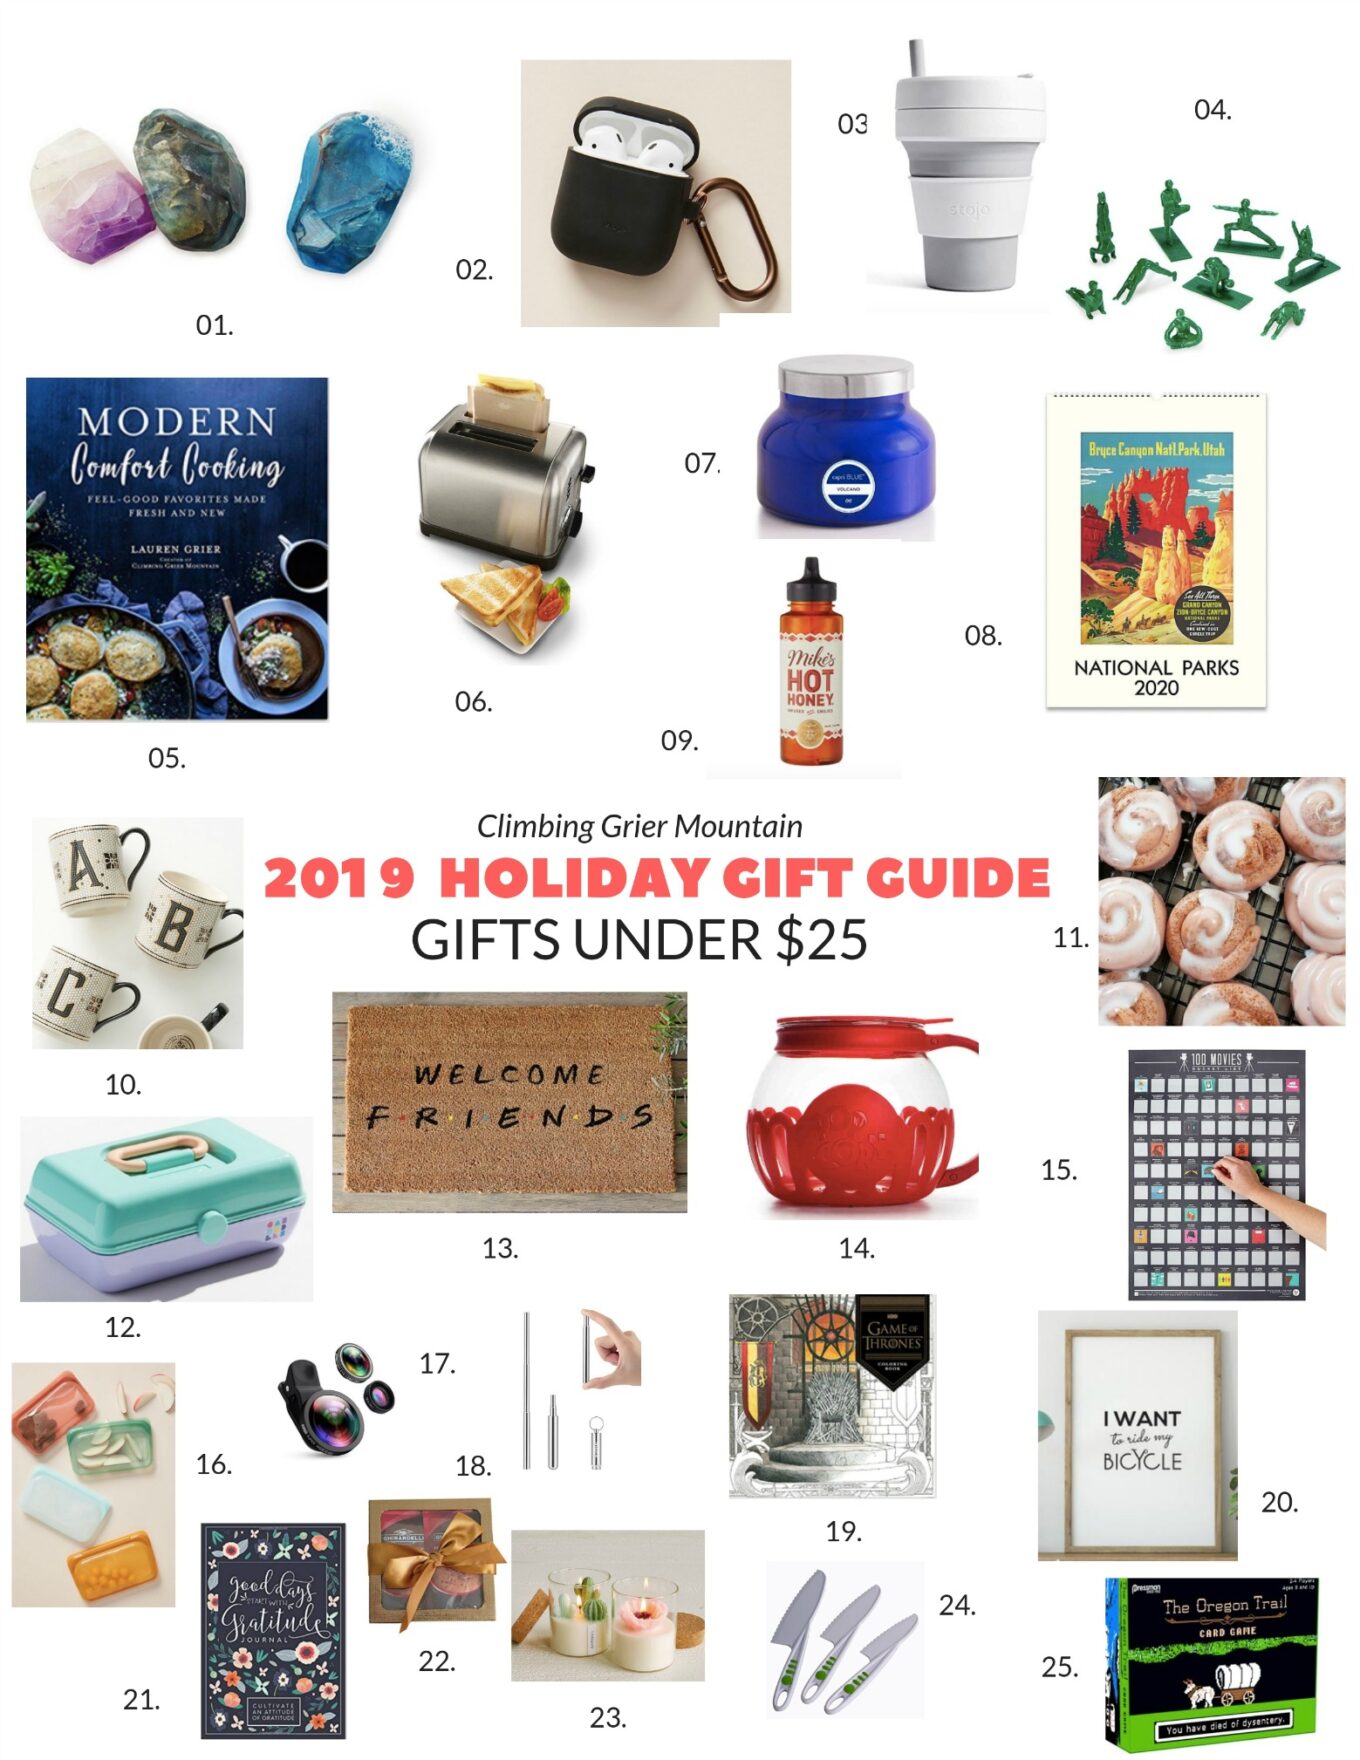 https://thecuriousplate.com/wp-content/uploads/2019/09/CGM-2019-Holiday-Gift-Guide-Gifts-Under-25-www.climbinggriermountain.com_.jpg